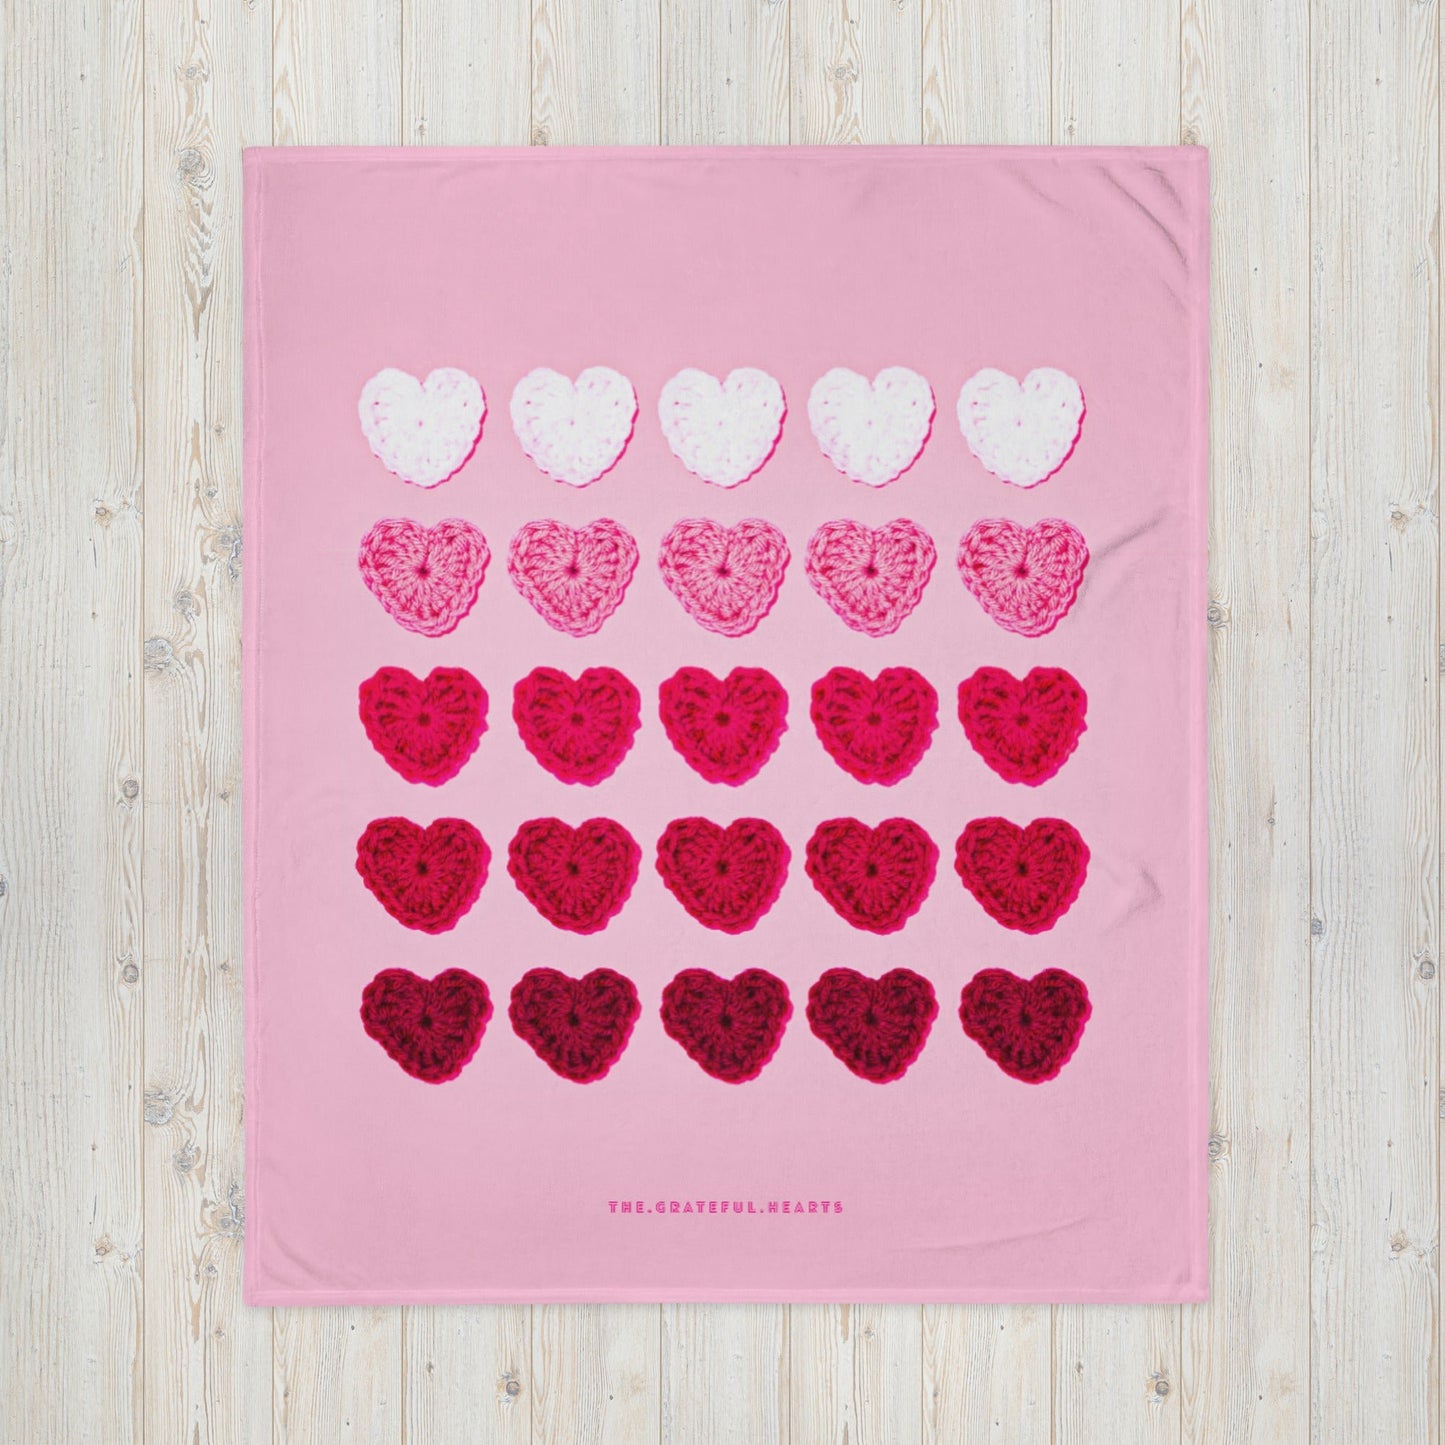 Fabric Hearts ❤️ Throw Blanket - The Grateful Hearts